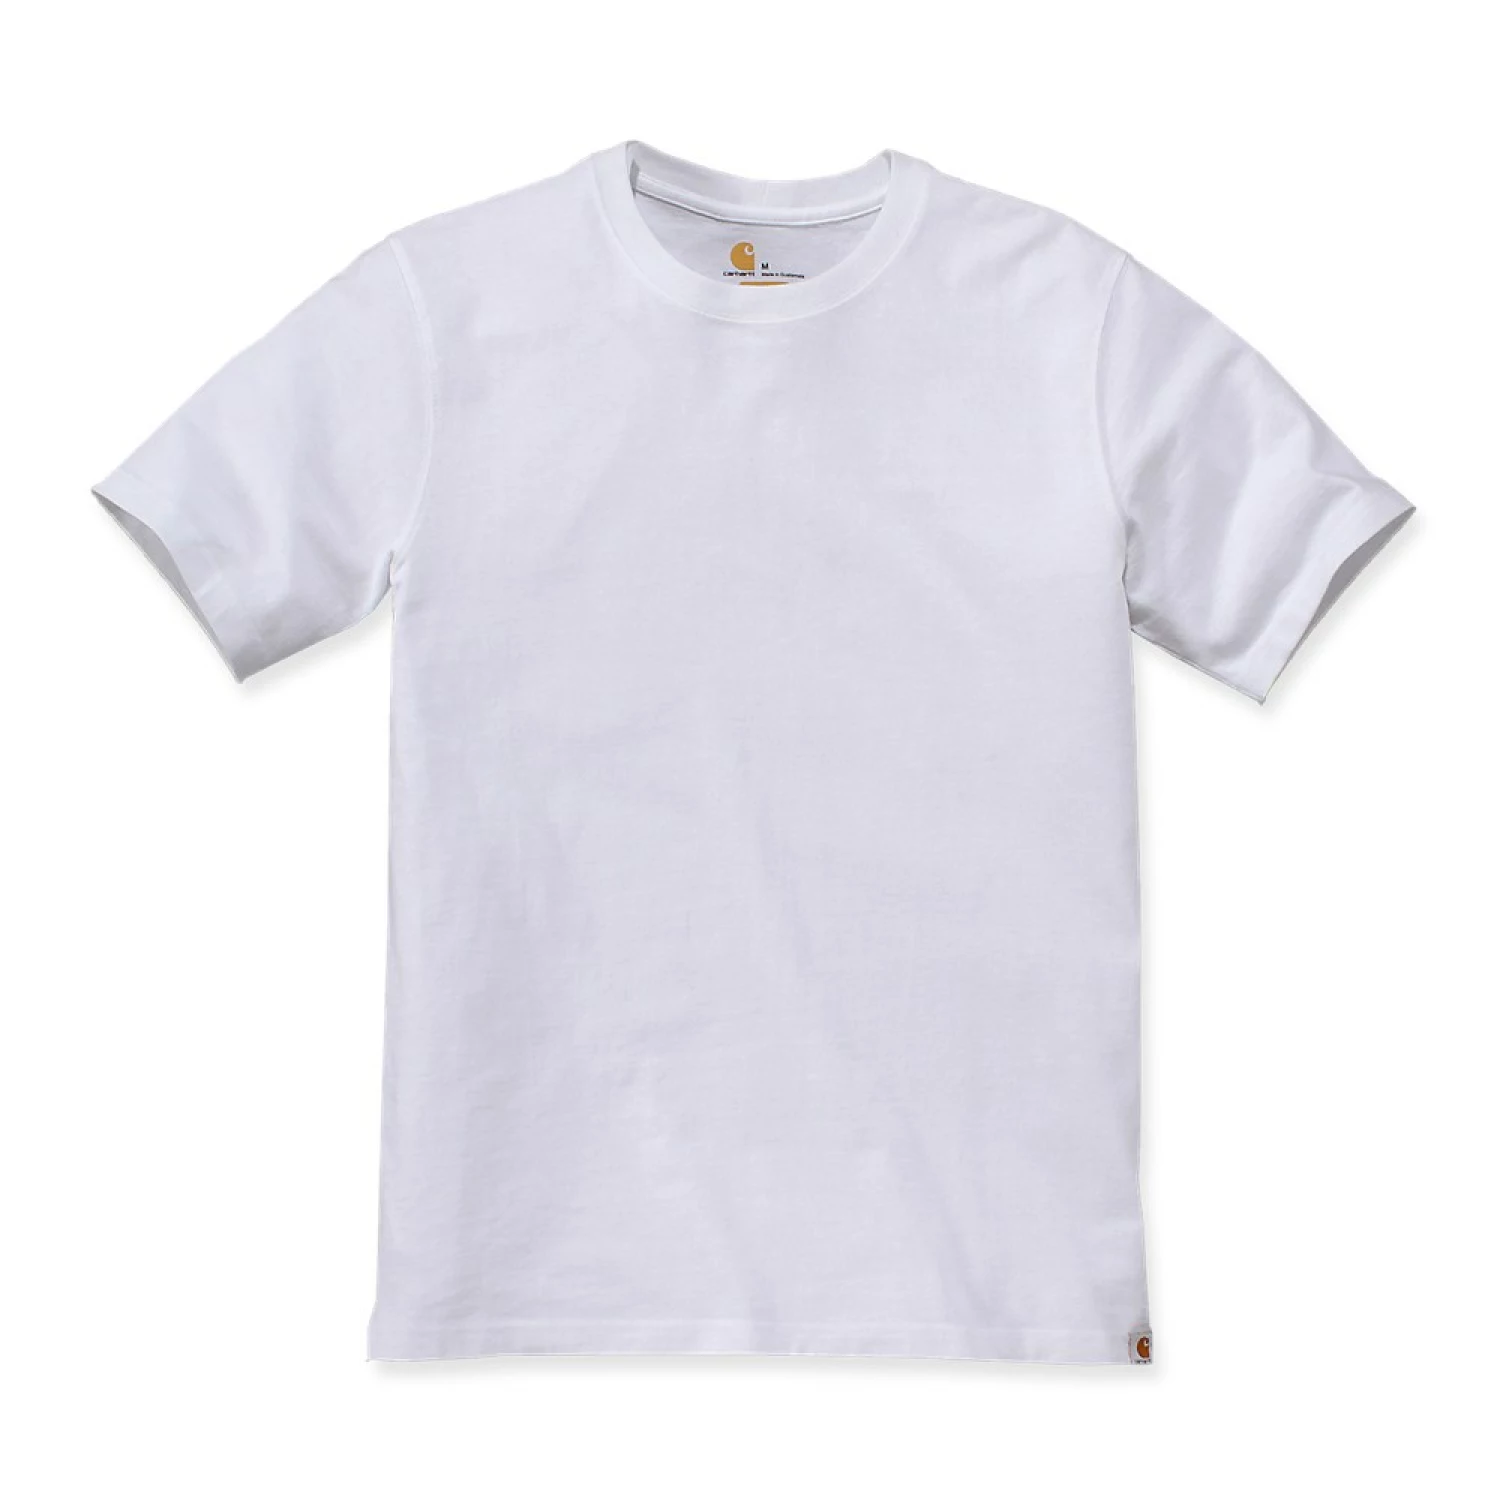 Carhartt 104264 Workwear Solid T-Shirt - Relaxed Fit - White - XXL-image